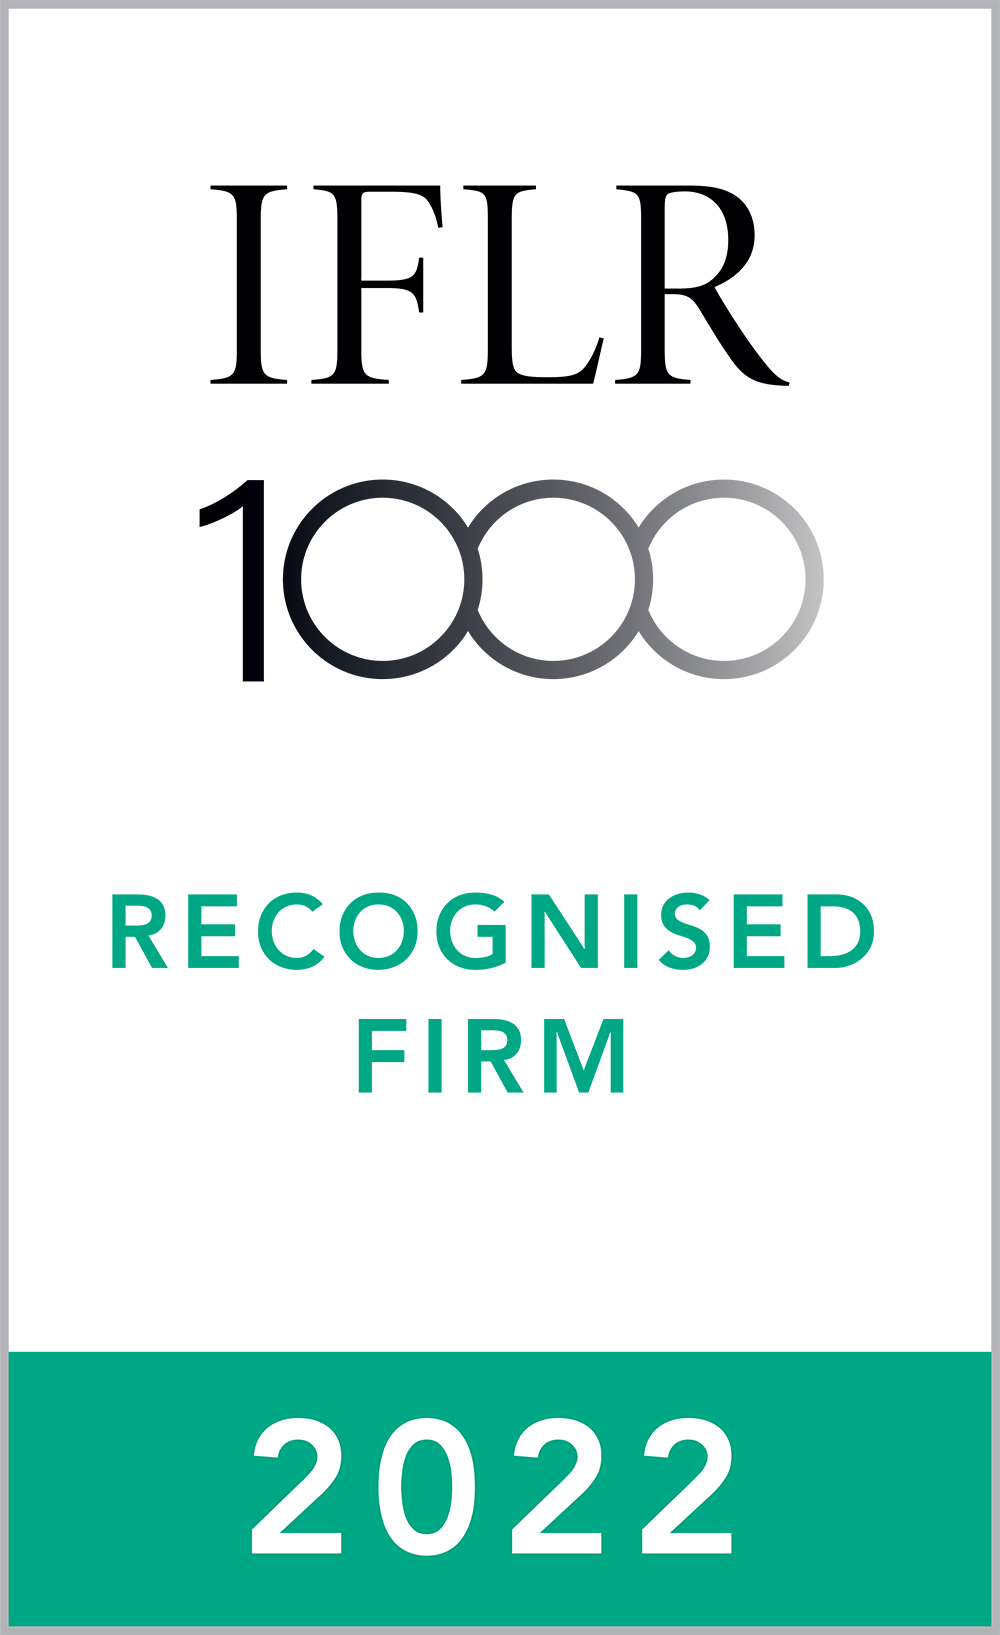 Ranked "Notable Firm" in Capital Markets: Equity, Capital Markets: Debt, M&A , Restructuring and Insolvency by IFLR1000 2022/23